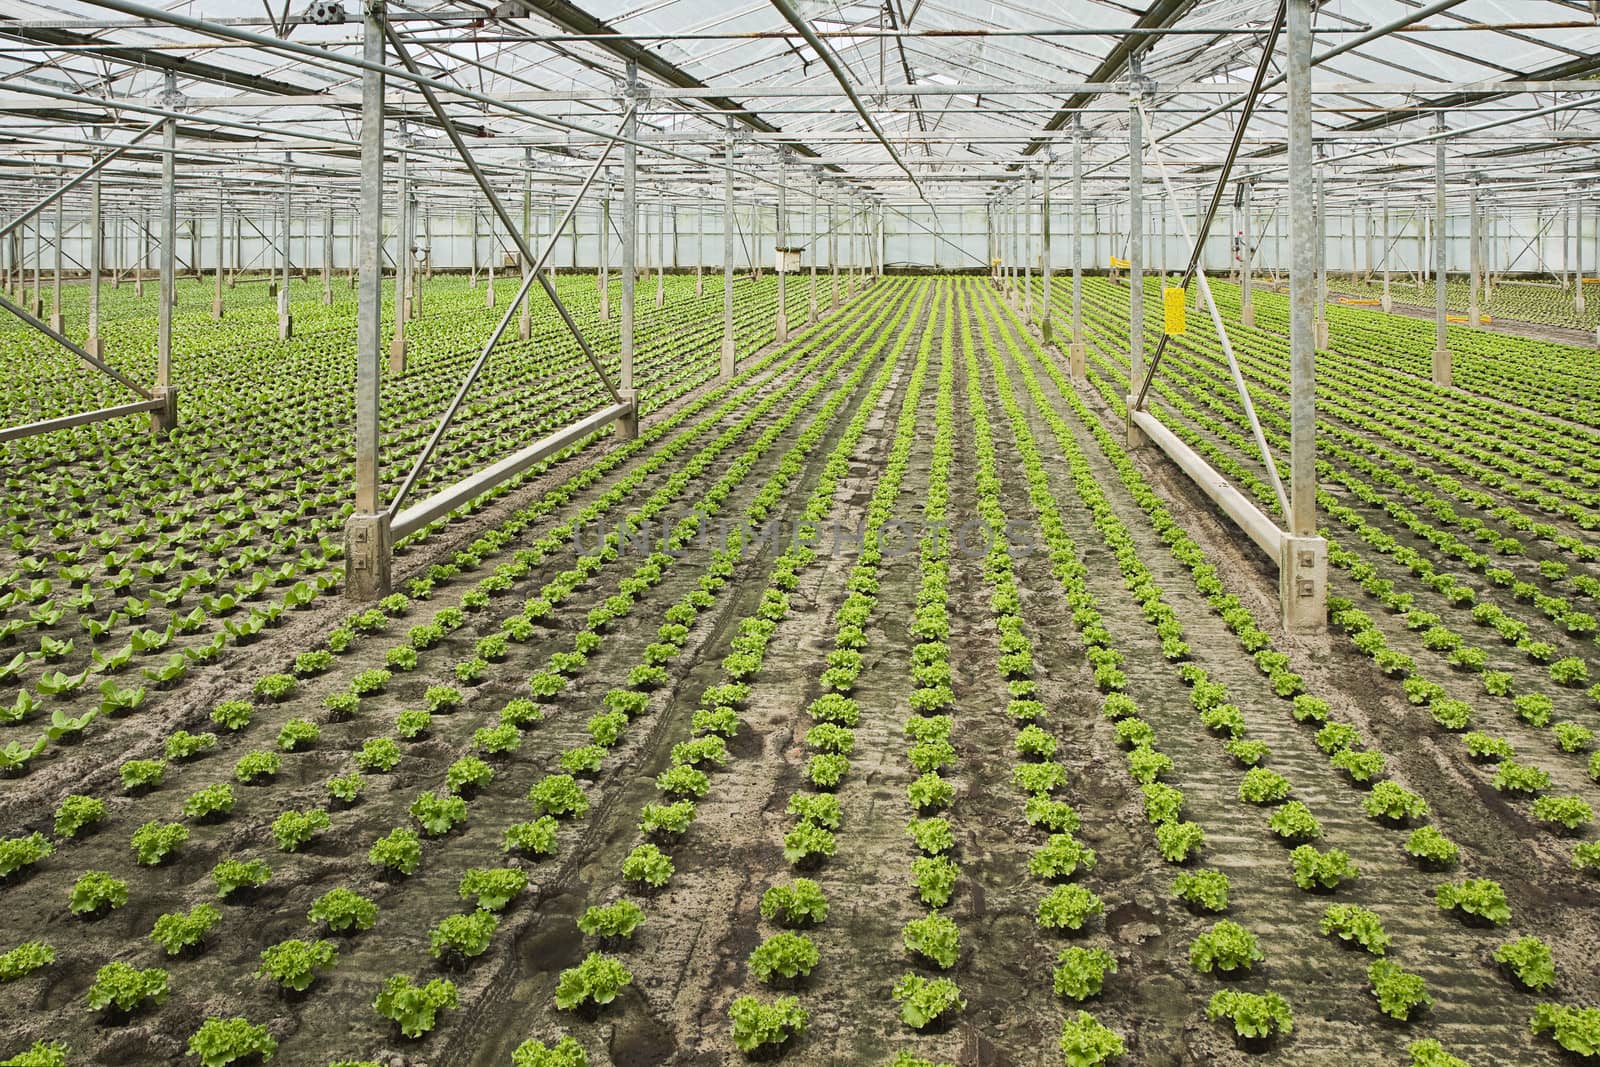 Overview new planting of young Salad plants in glasshouse in summer - horizontal